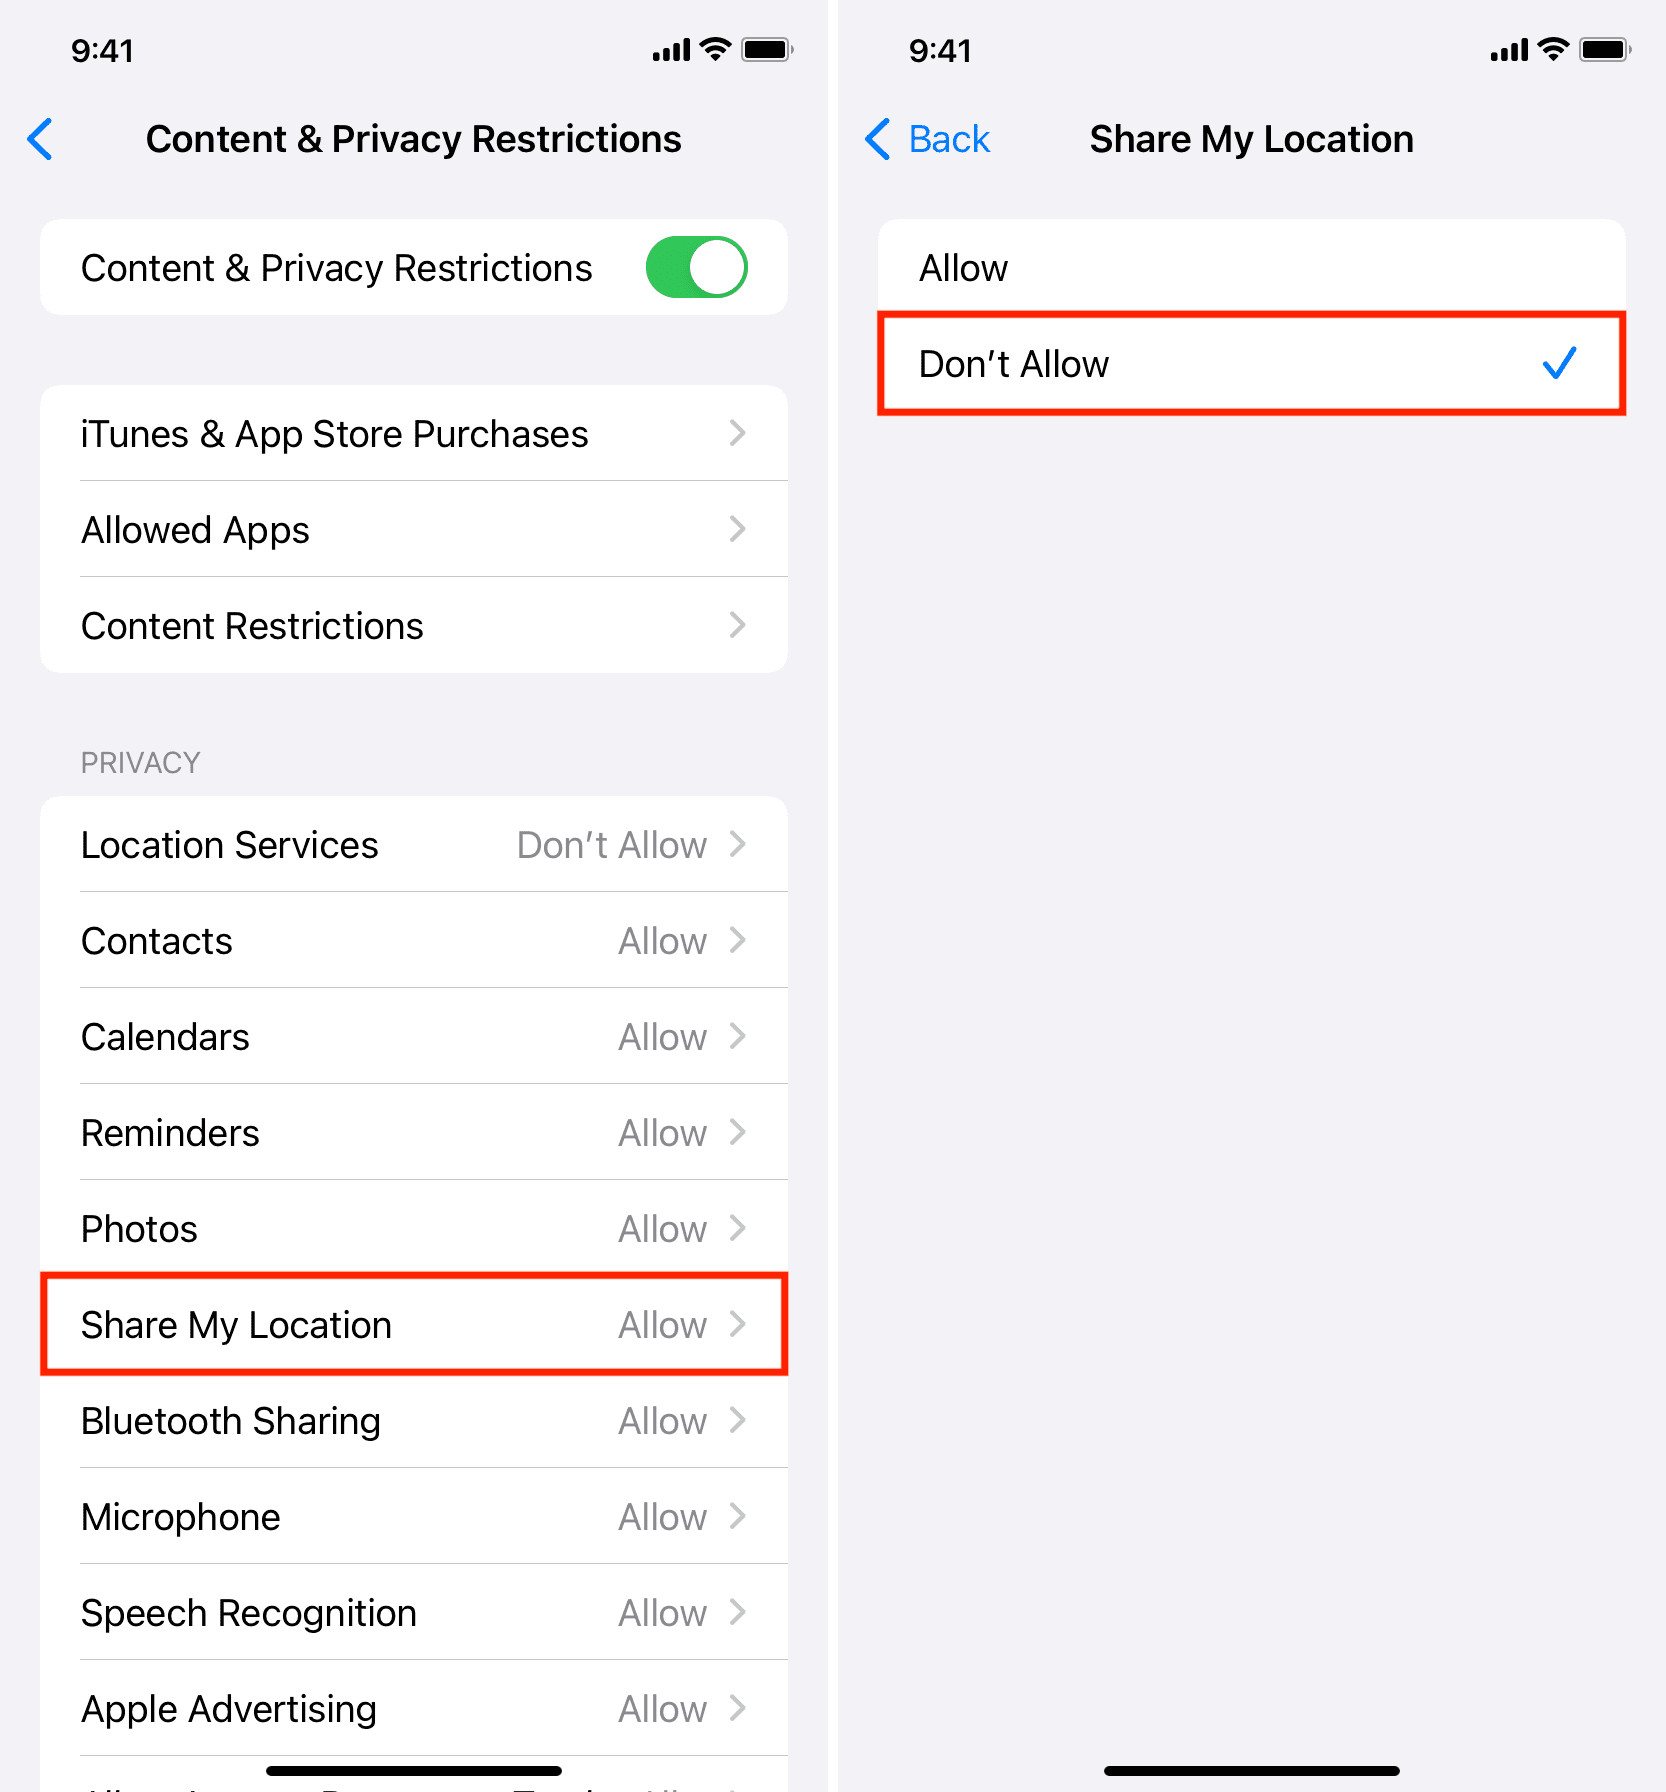 Do not allow sharing location on iPhone